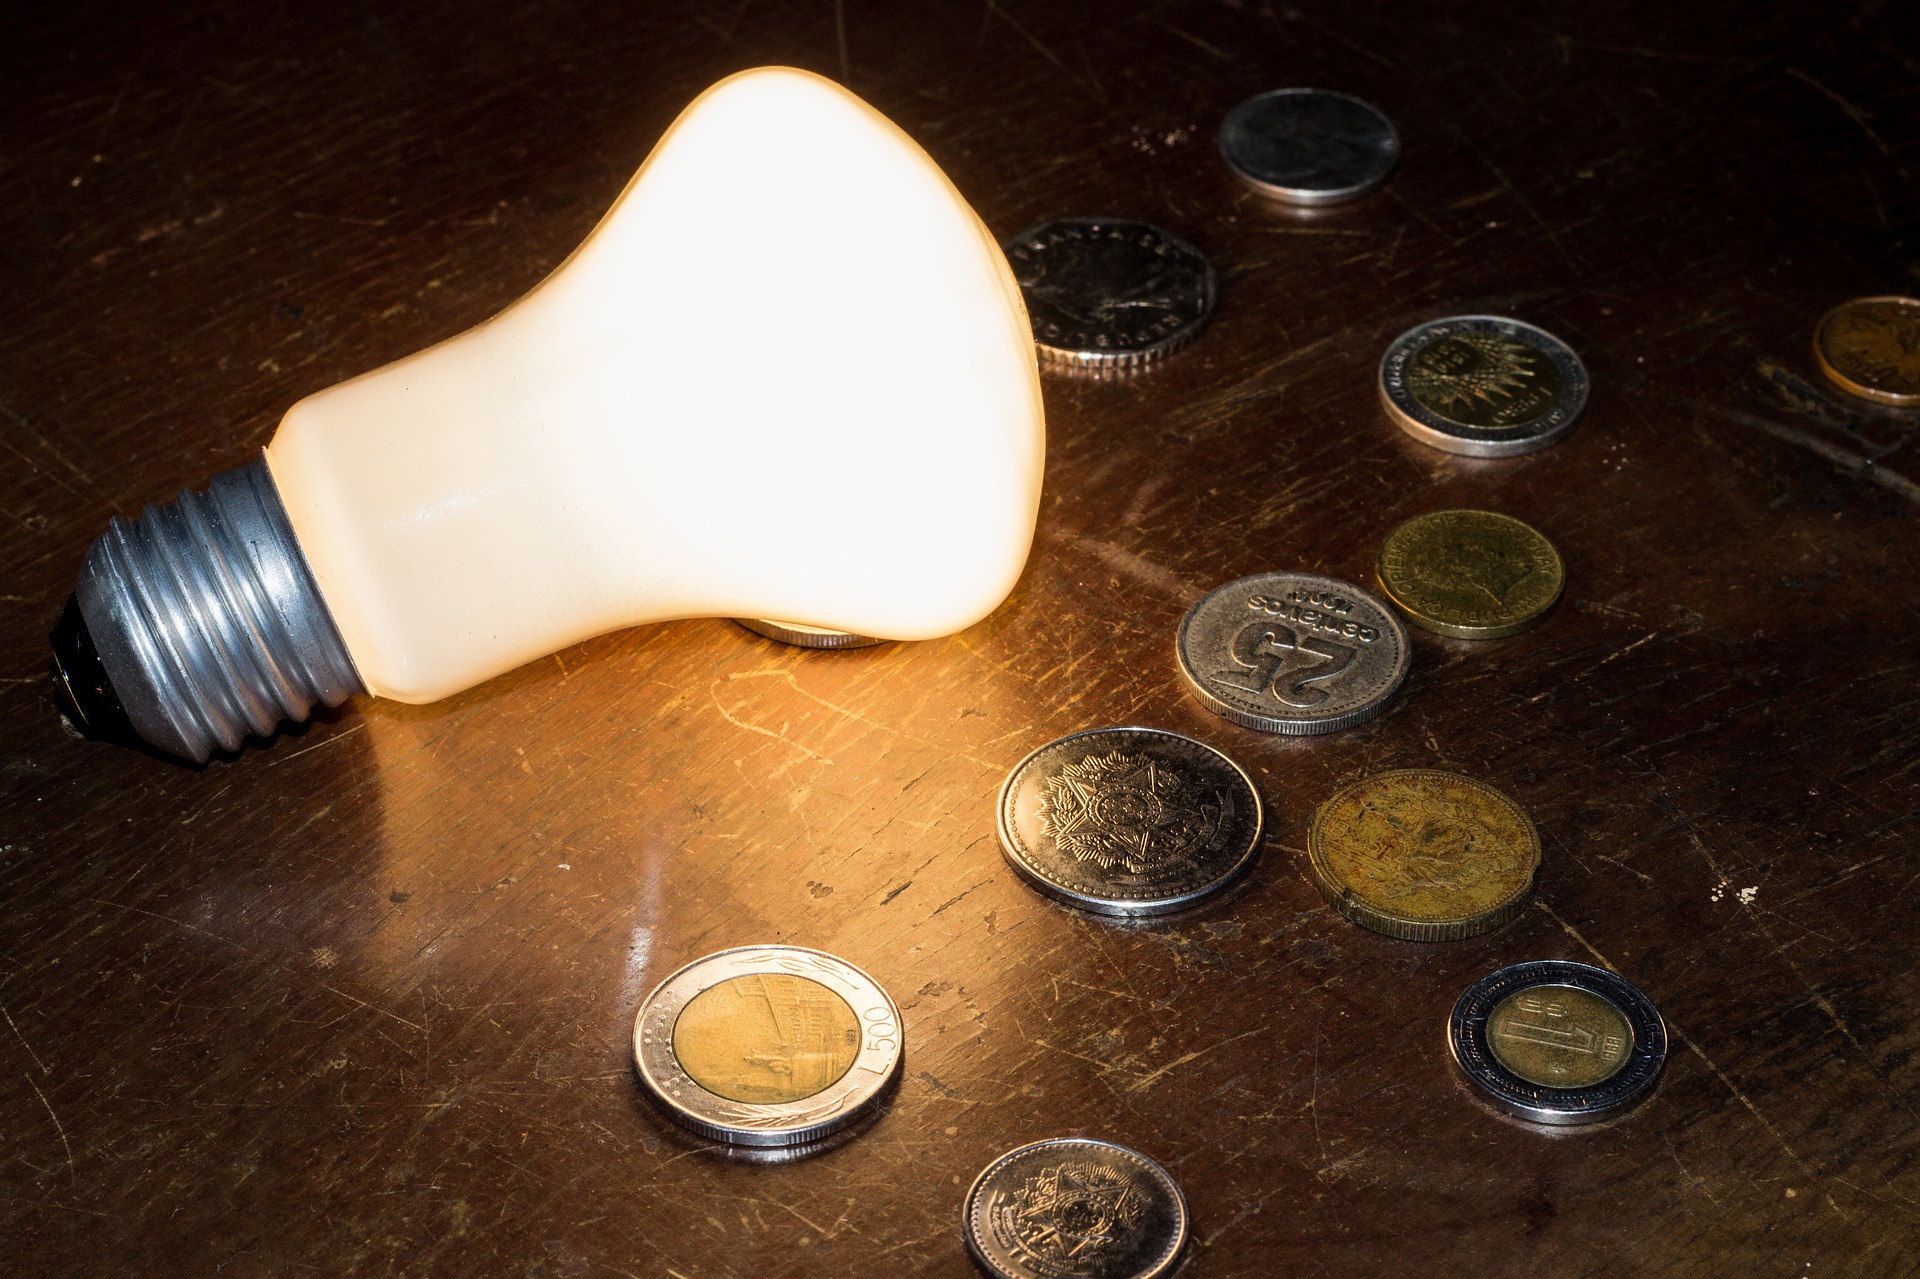 Four proposals from the Greek government for lower electricity prices